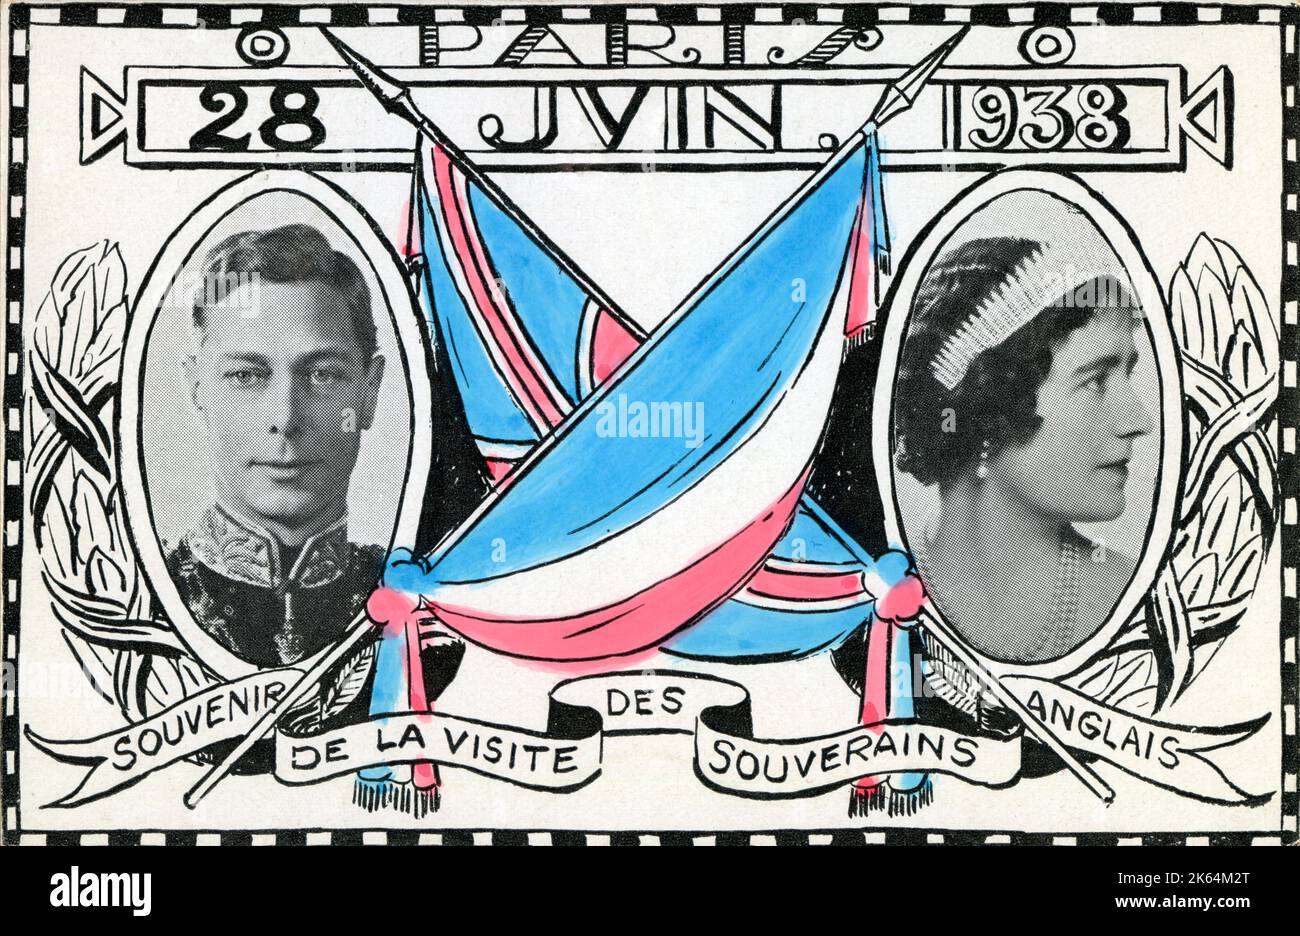 Souvenir of the British Royal visit to Paris on June 28, 1938 - portraits of Kinfg George VI (1895-1952) and Queen Elizabeth (later The Queen Mother) (1900-2002).     Date: circa 1930s Stock Photo